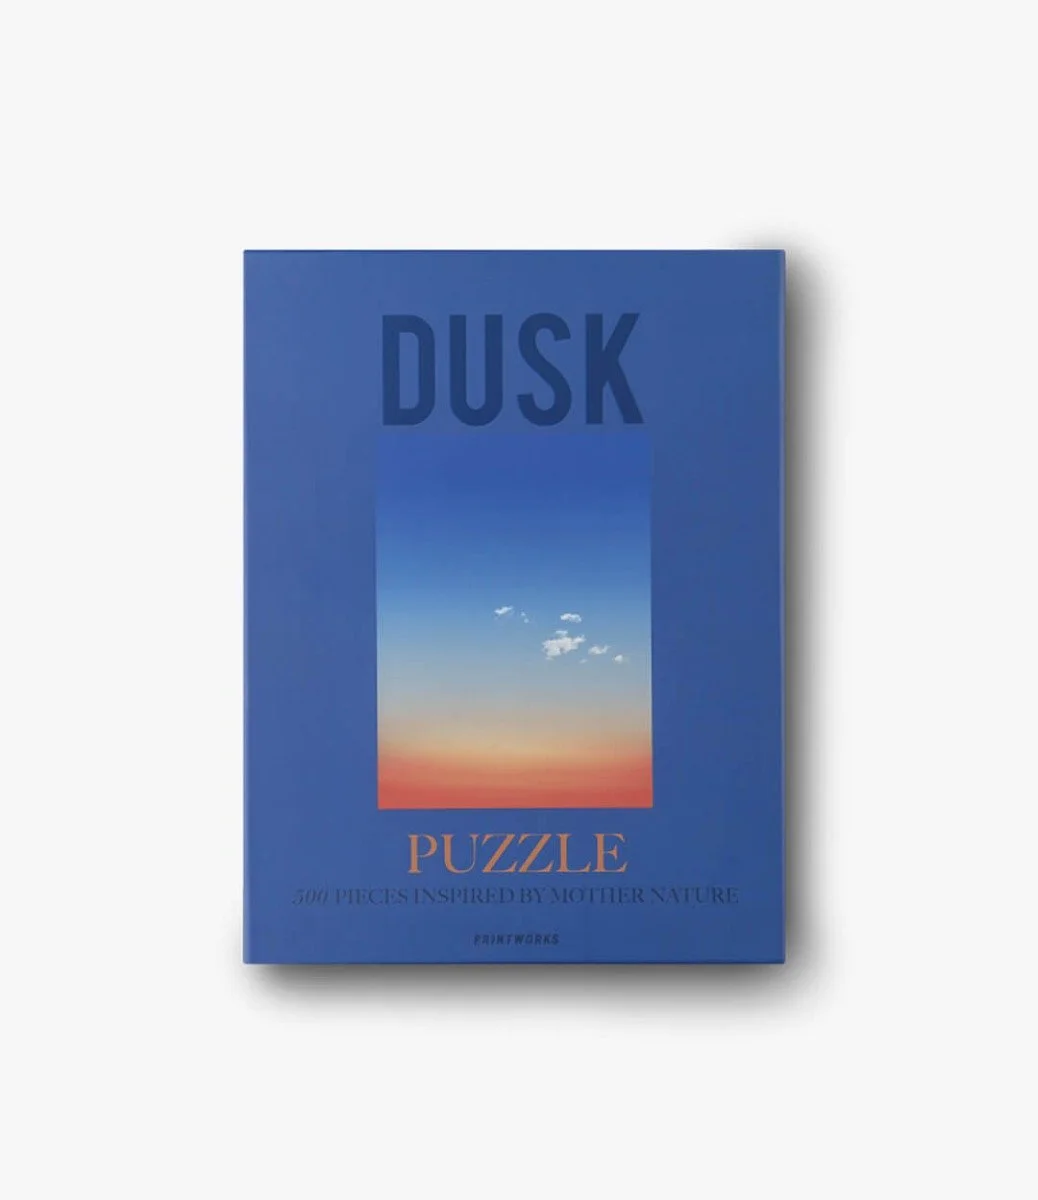 Puzzle - Dusk by Printworks